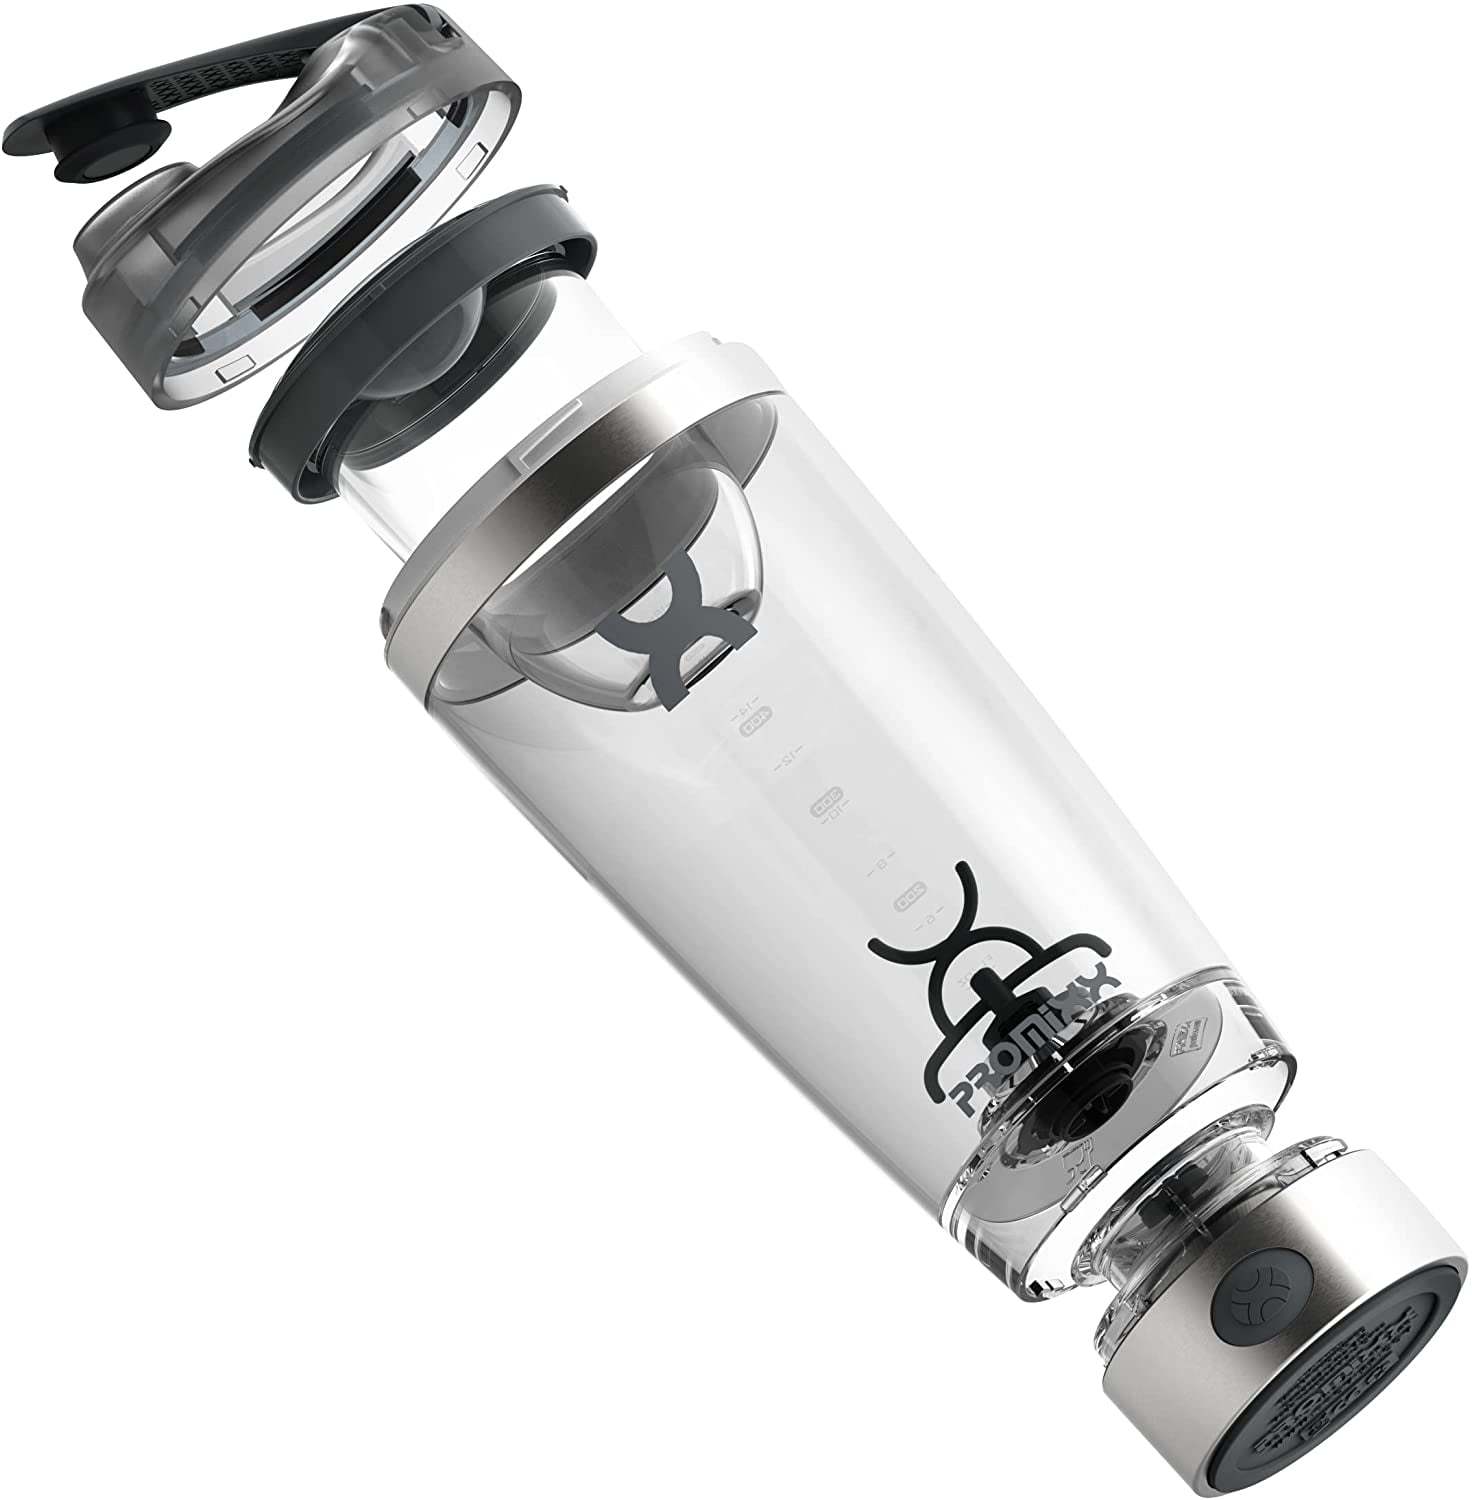 Promixx Pro Rechargeable Usb-c Electric Shaker Bottle - Stainless